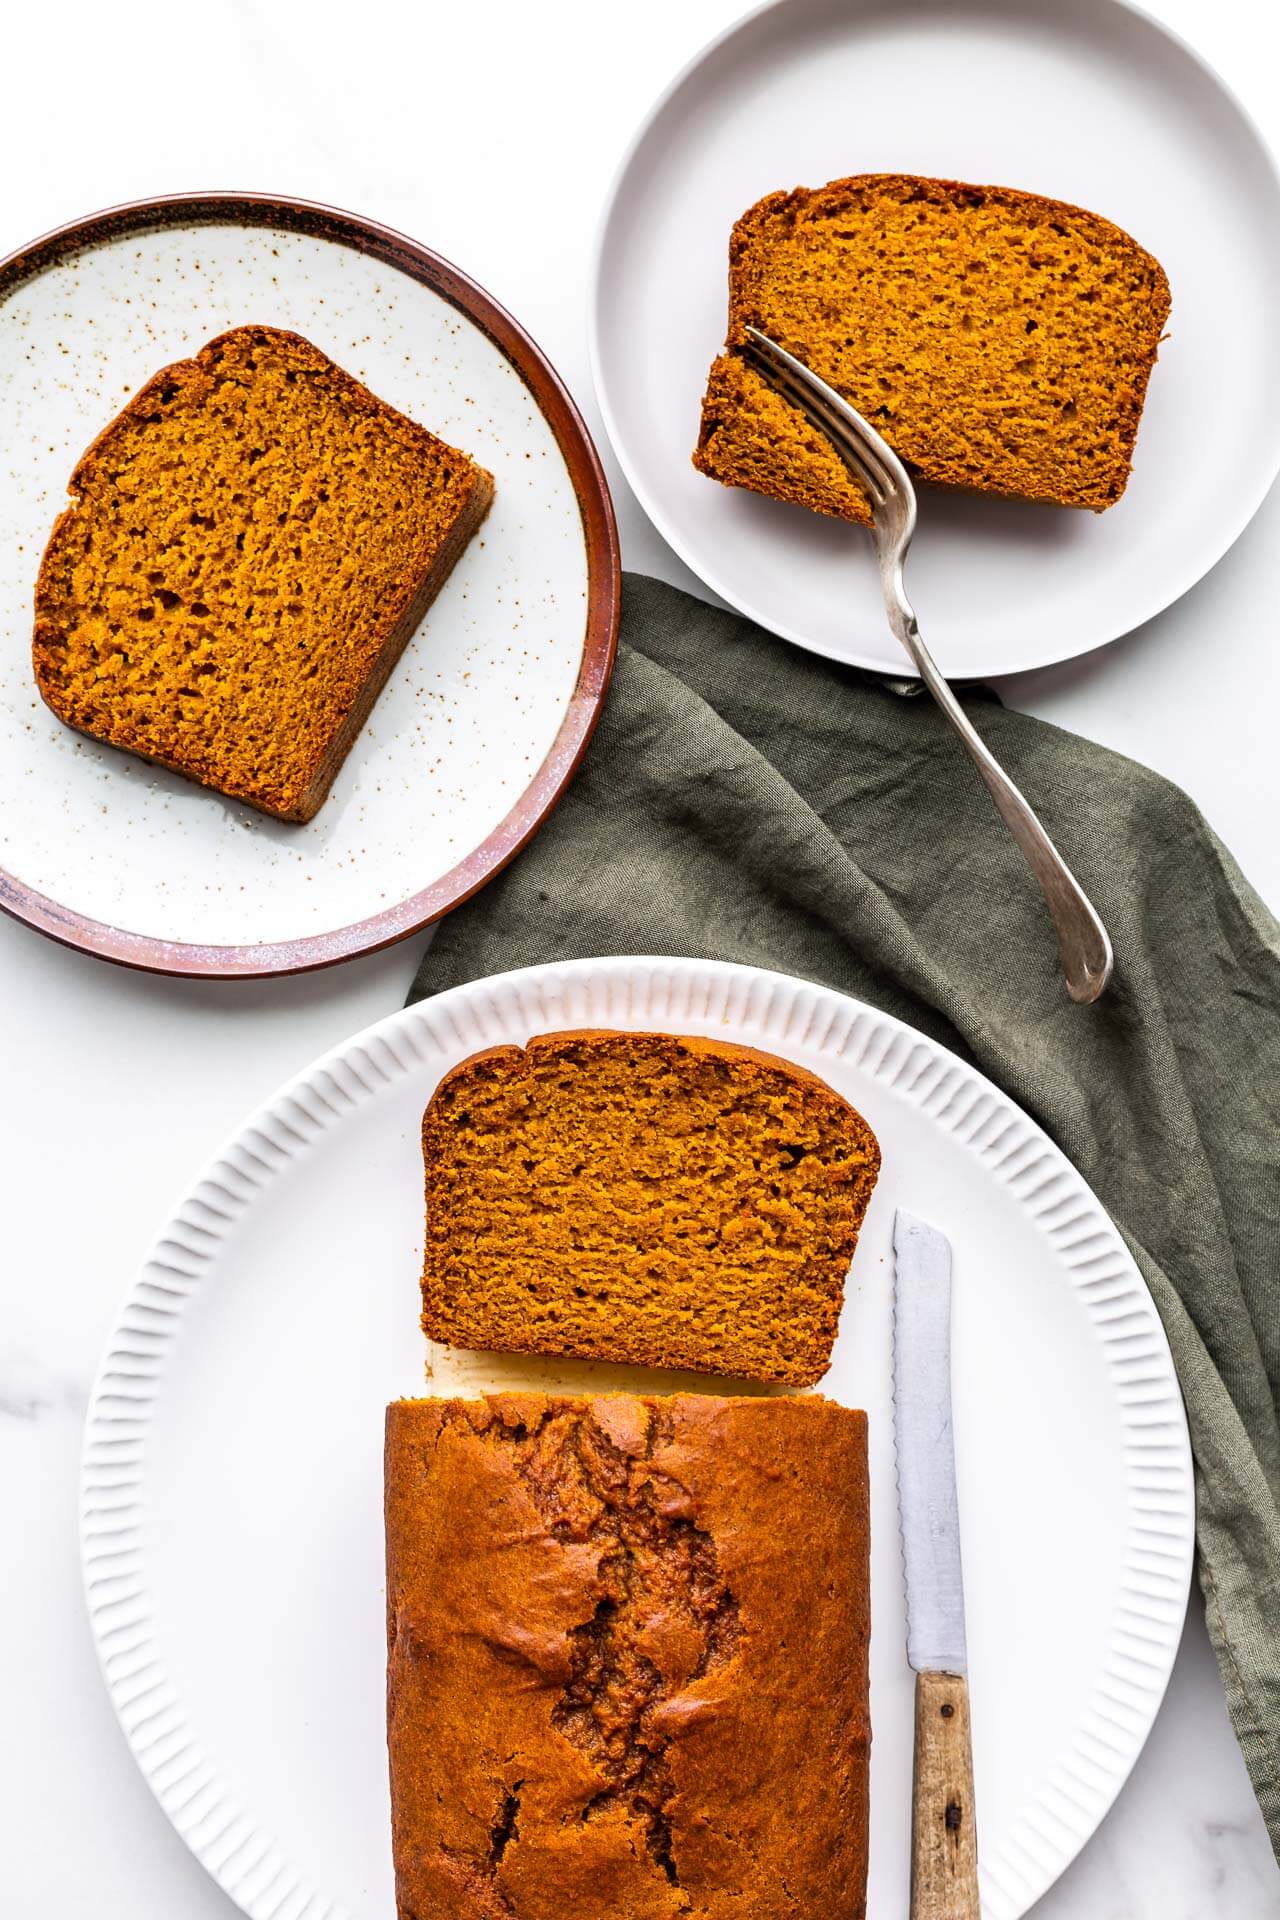 Slicing pumpkin loaf cake to serve on ceramic plates with green linen.